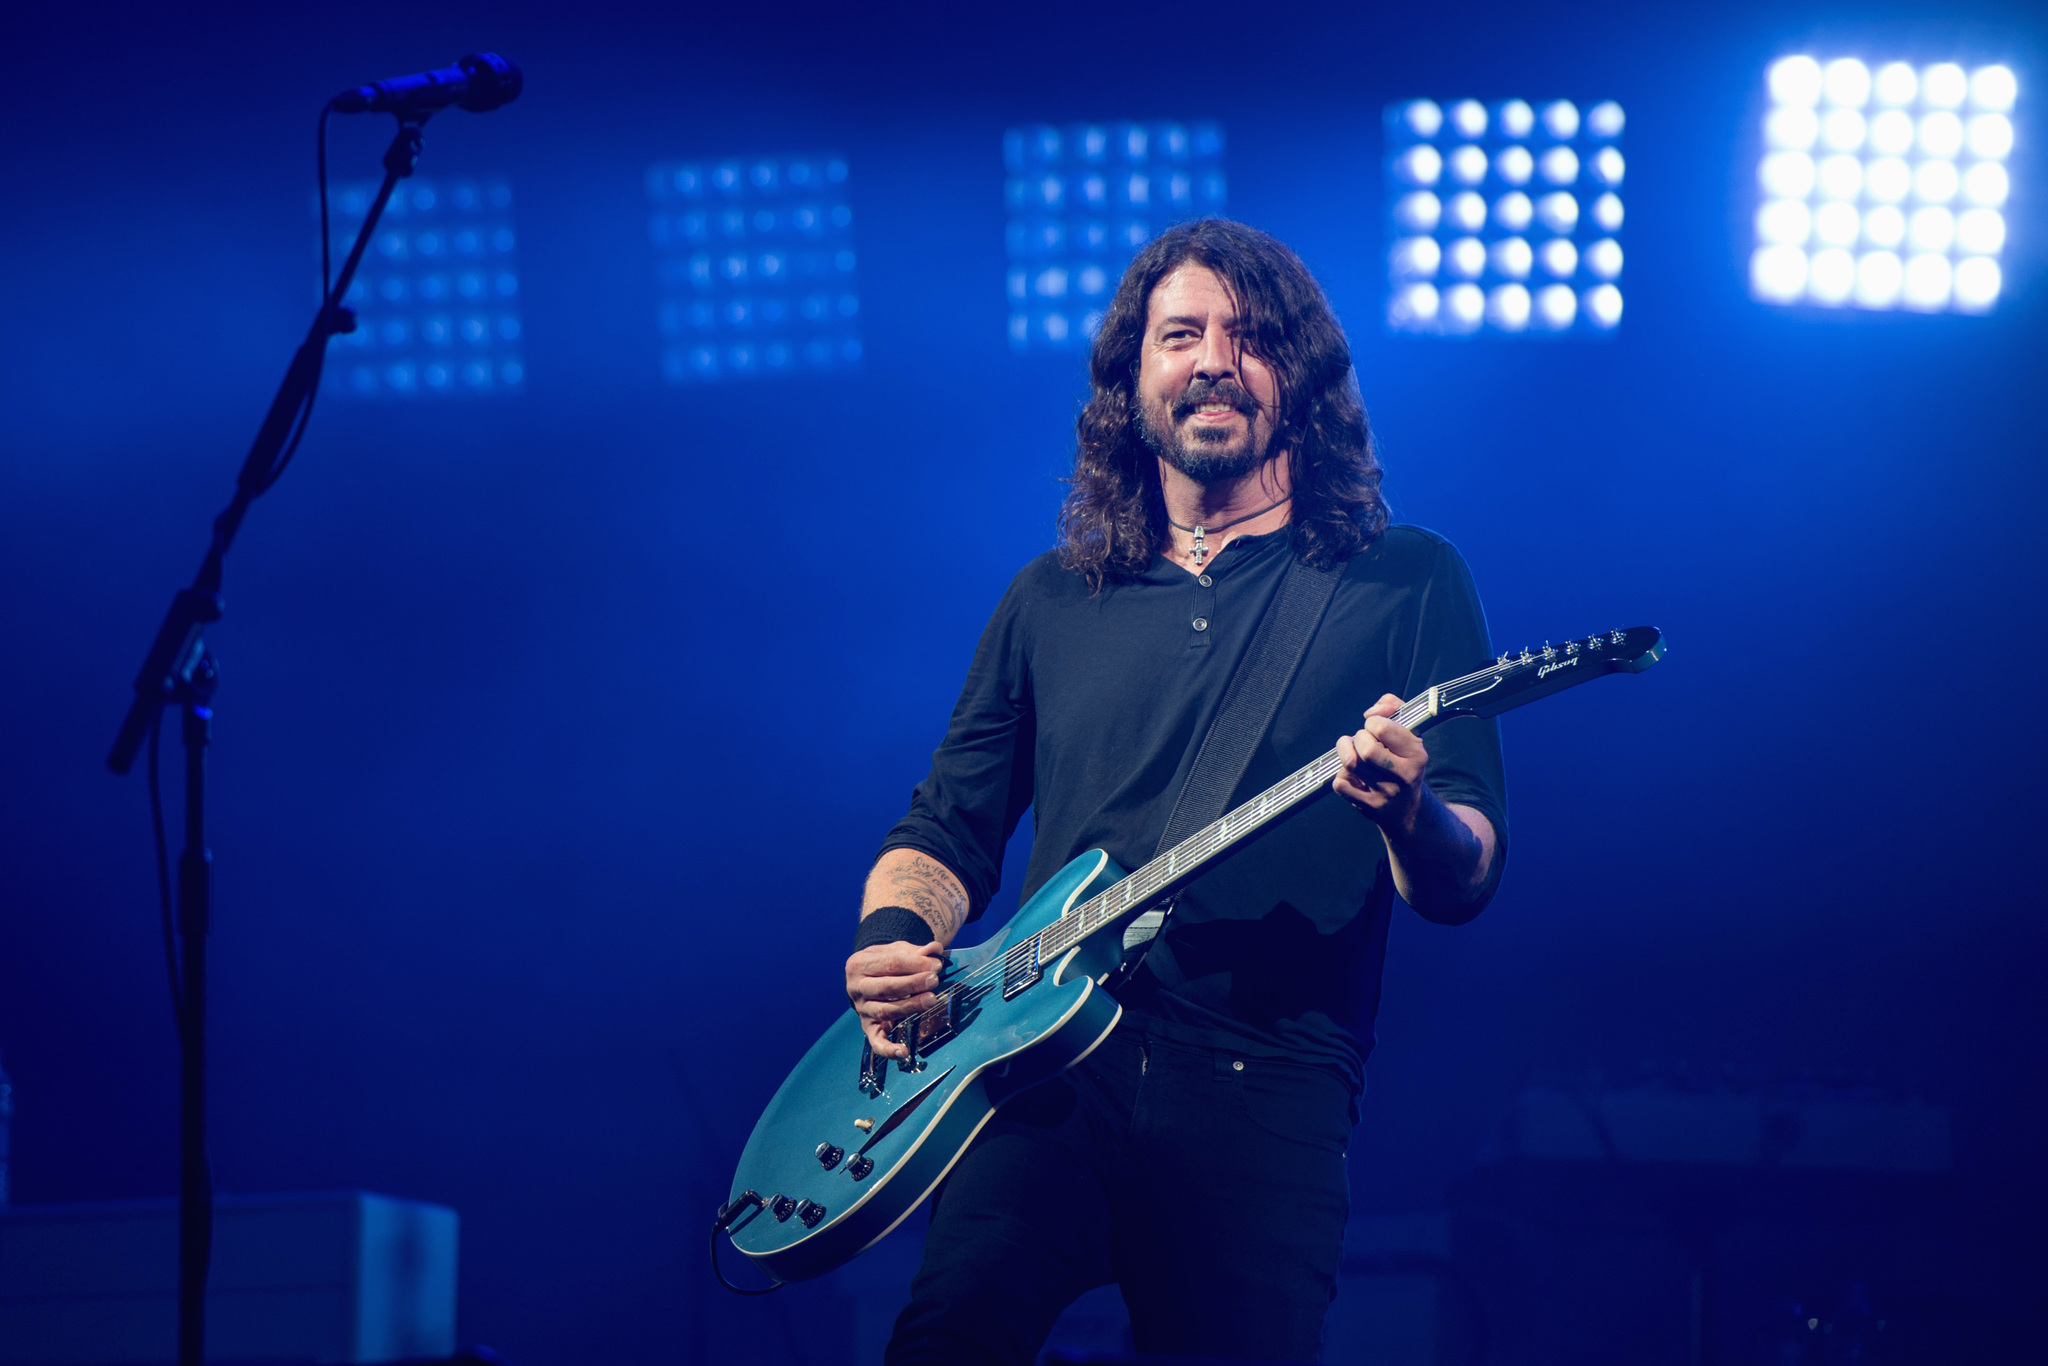 An emotional Dave Grohl pays tribute to Taylor Hawkins